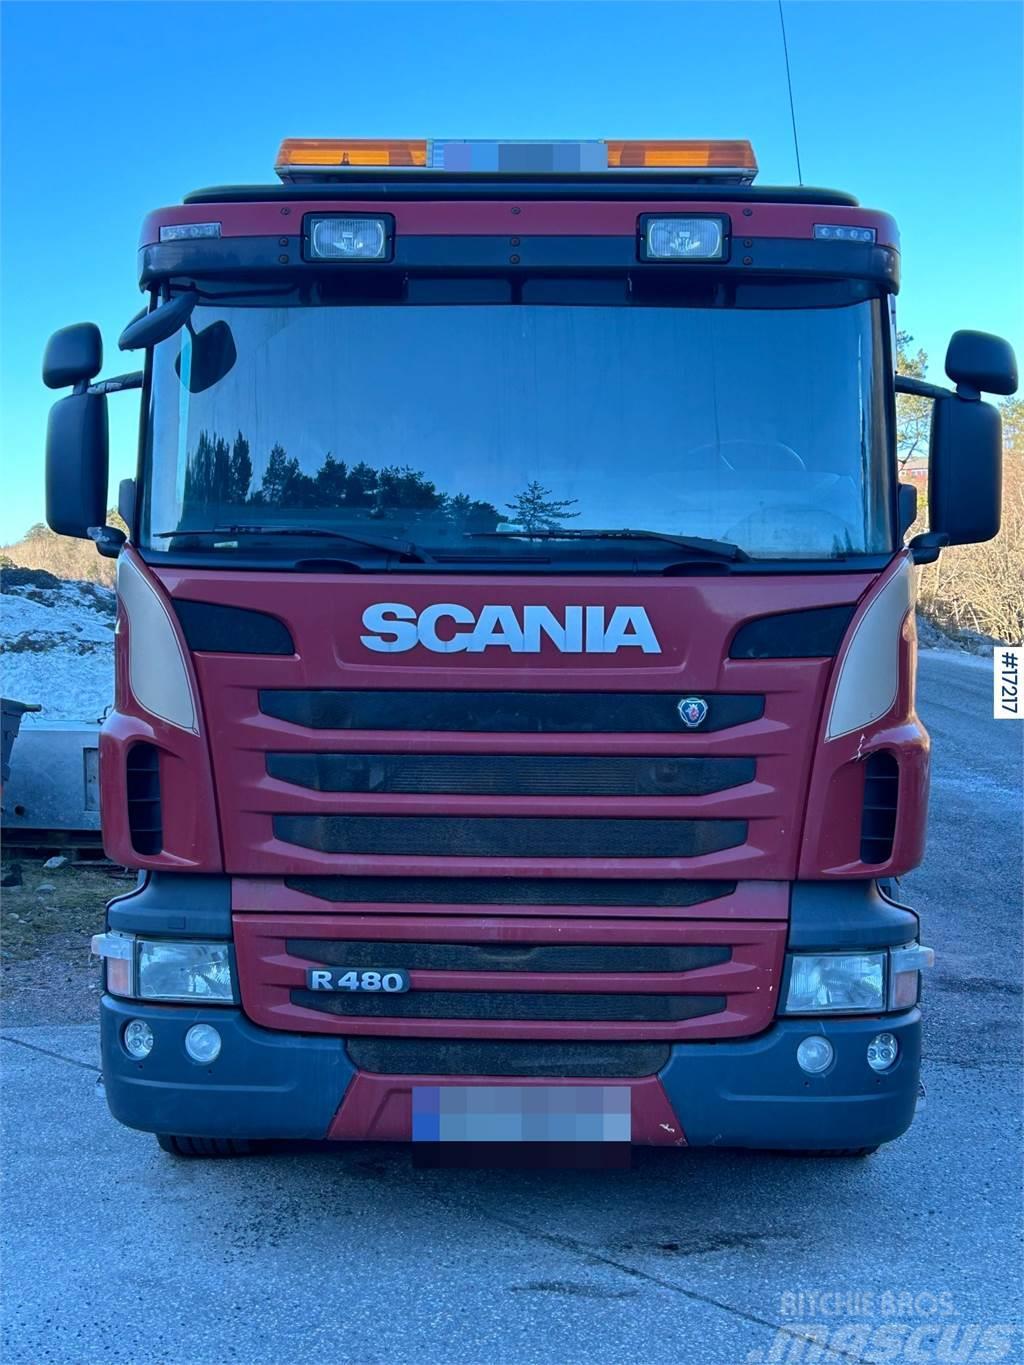 Scania R480 6x2 combi Fico suction/pump truck for sale as Tankbiler